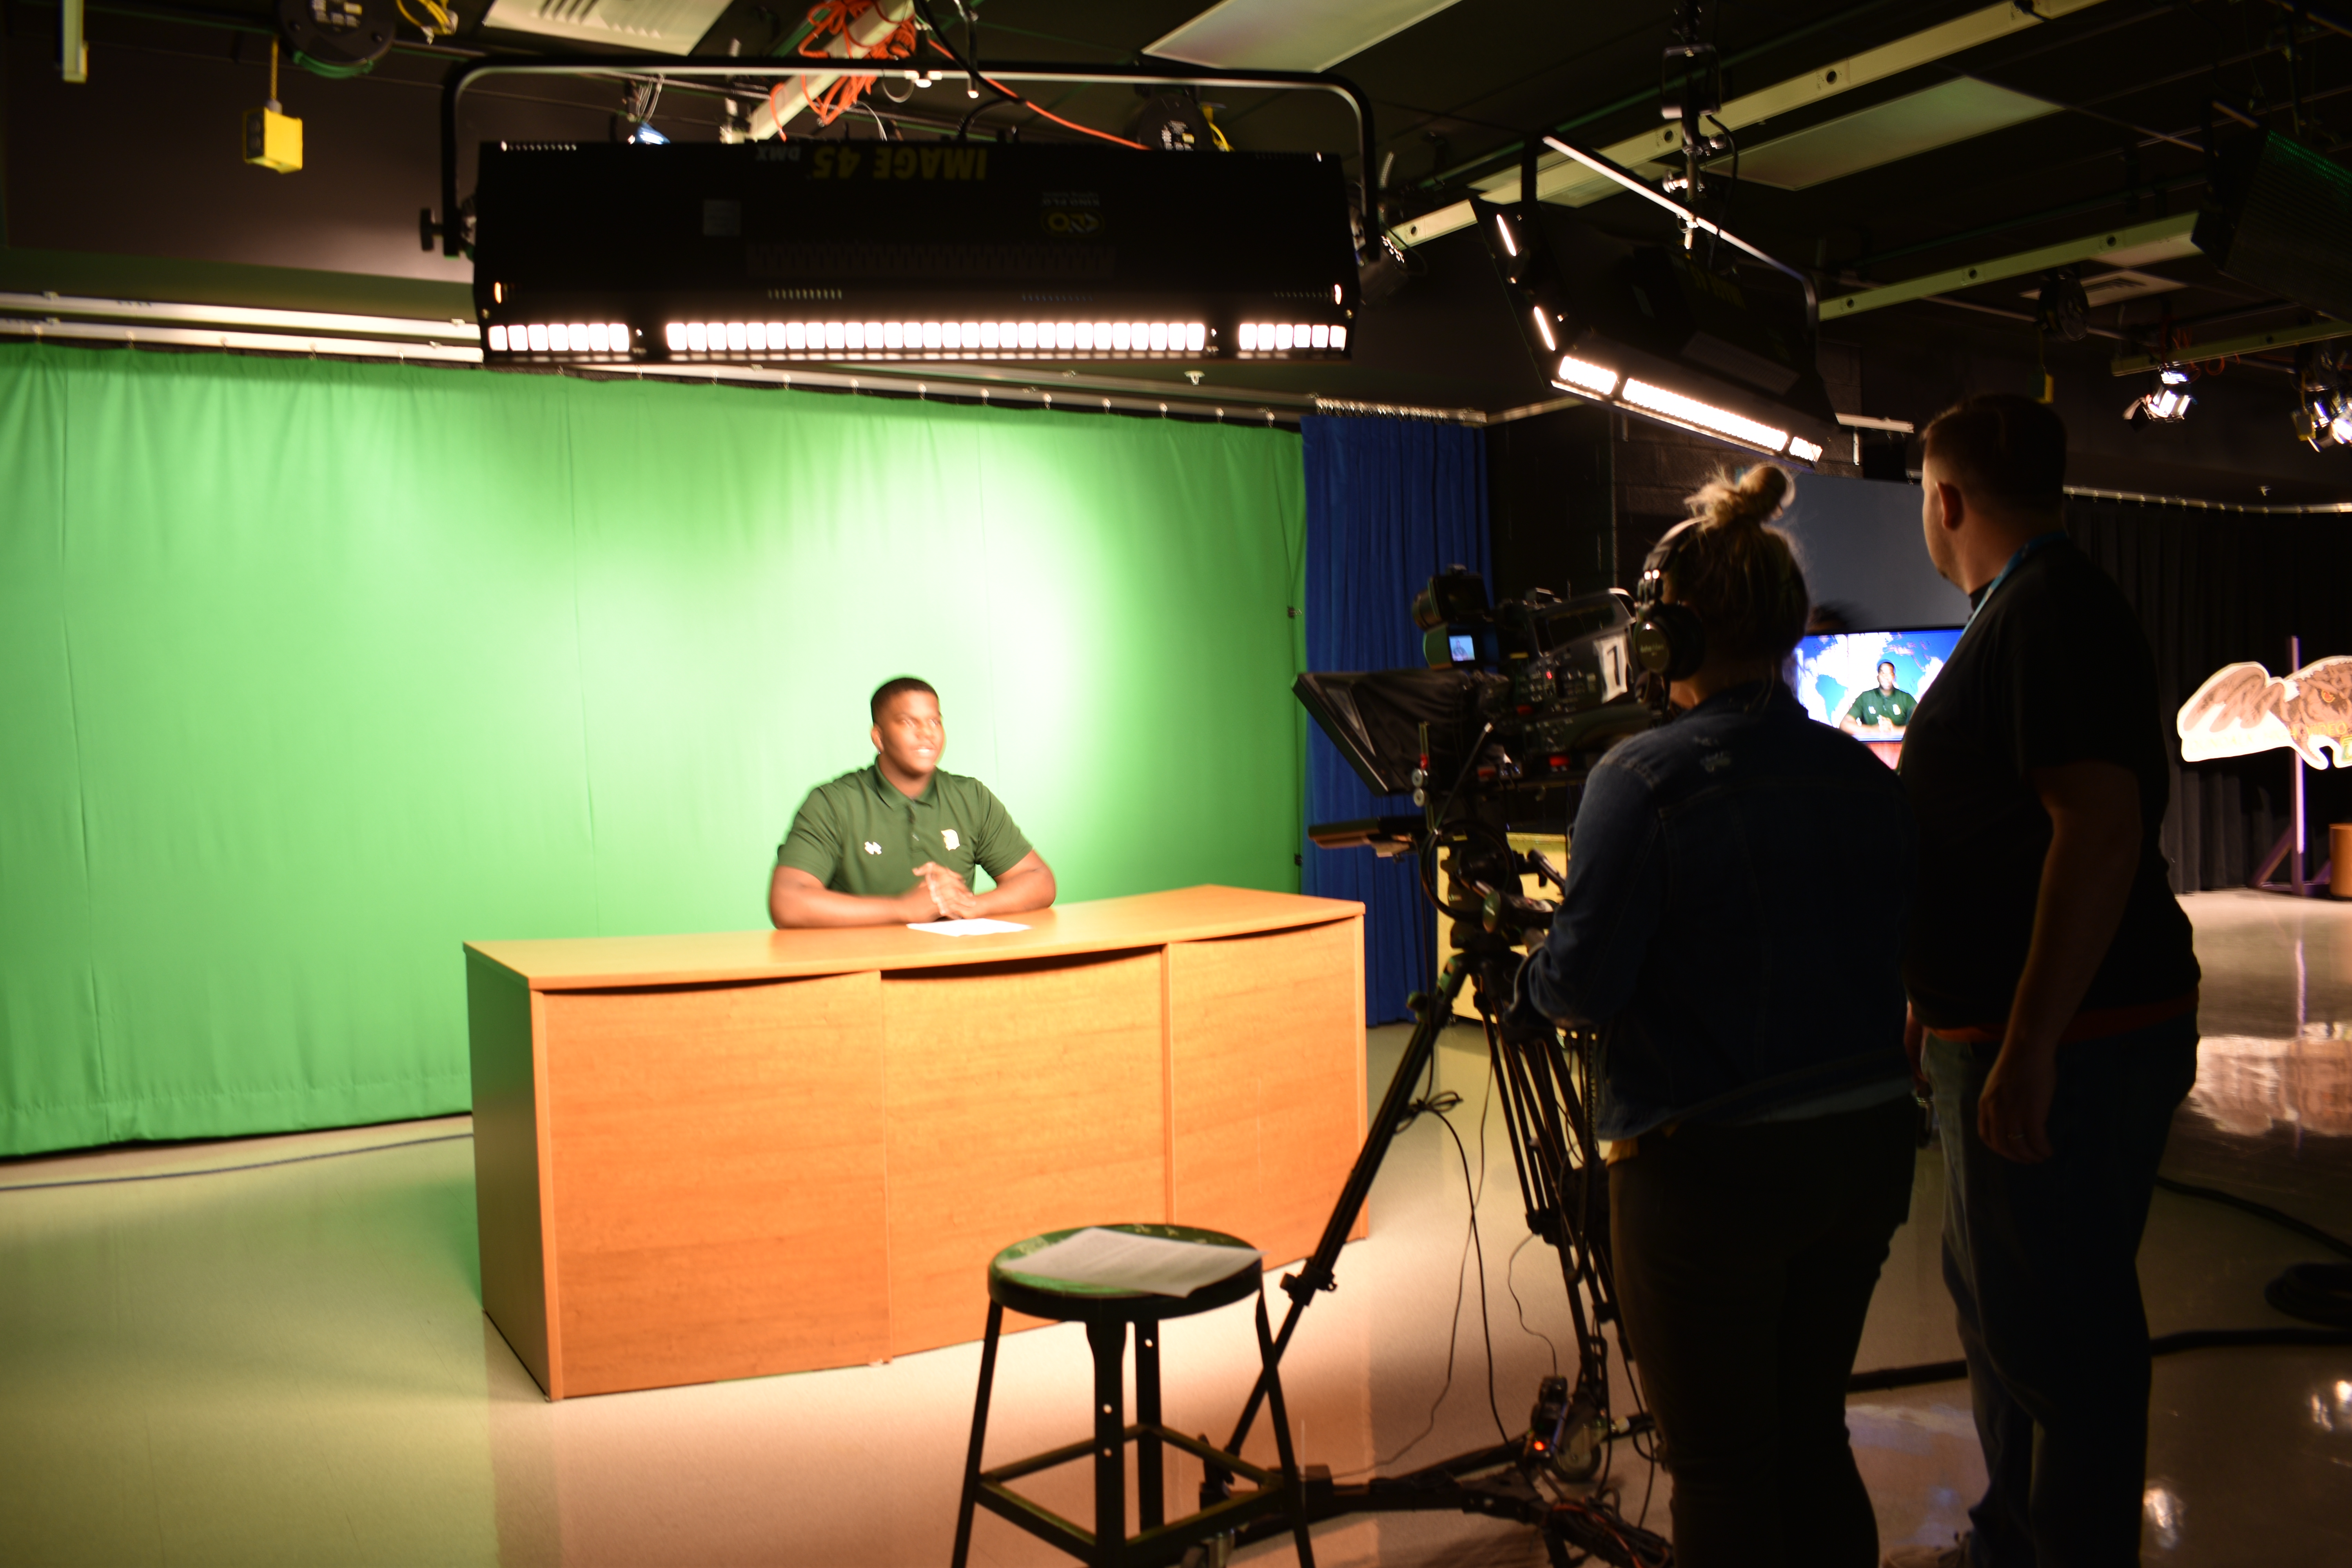 Student being recorded in the interactive Media Production class at Dundalk High School.